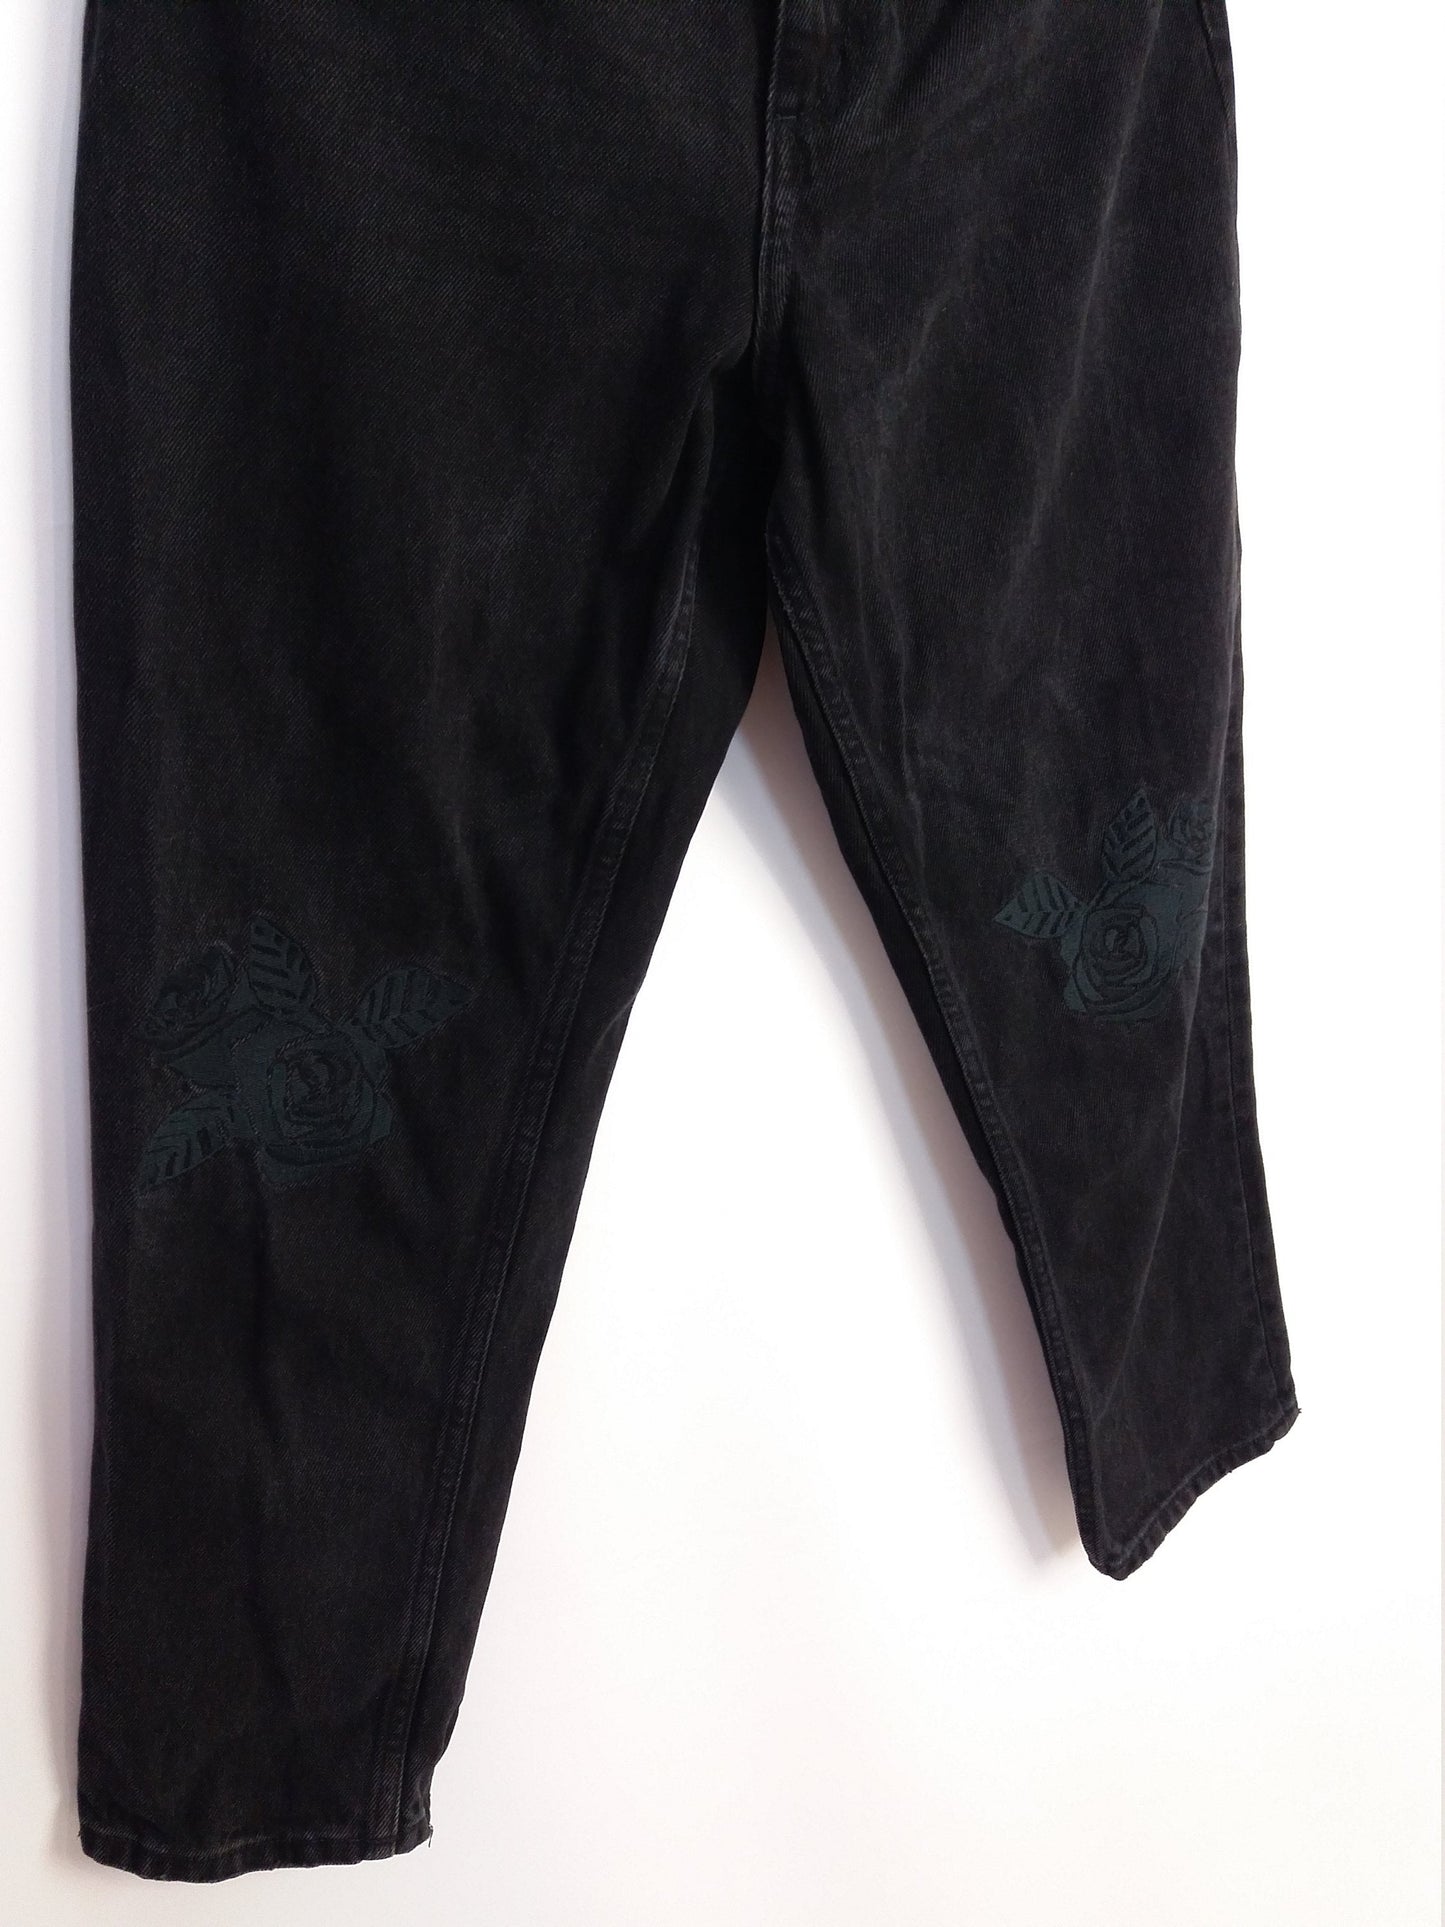 MONKI High Waist Black Mom Jeans Flower Embroidery Patch ~ size 25 - XS-S